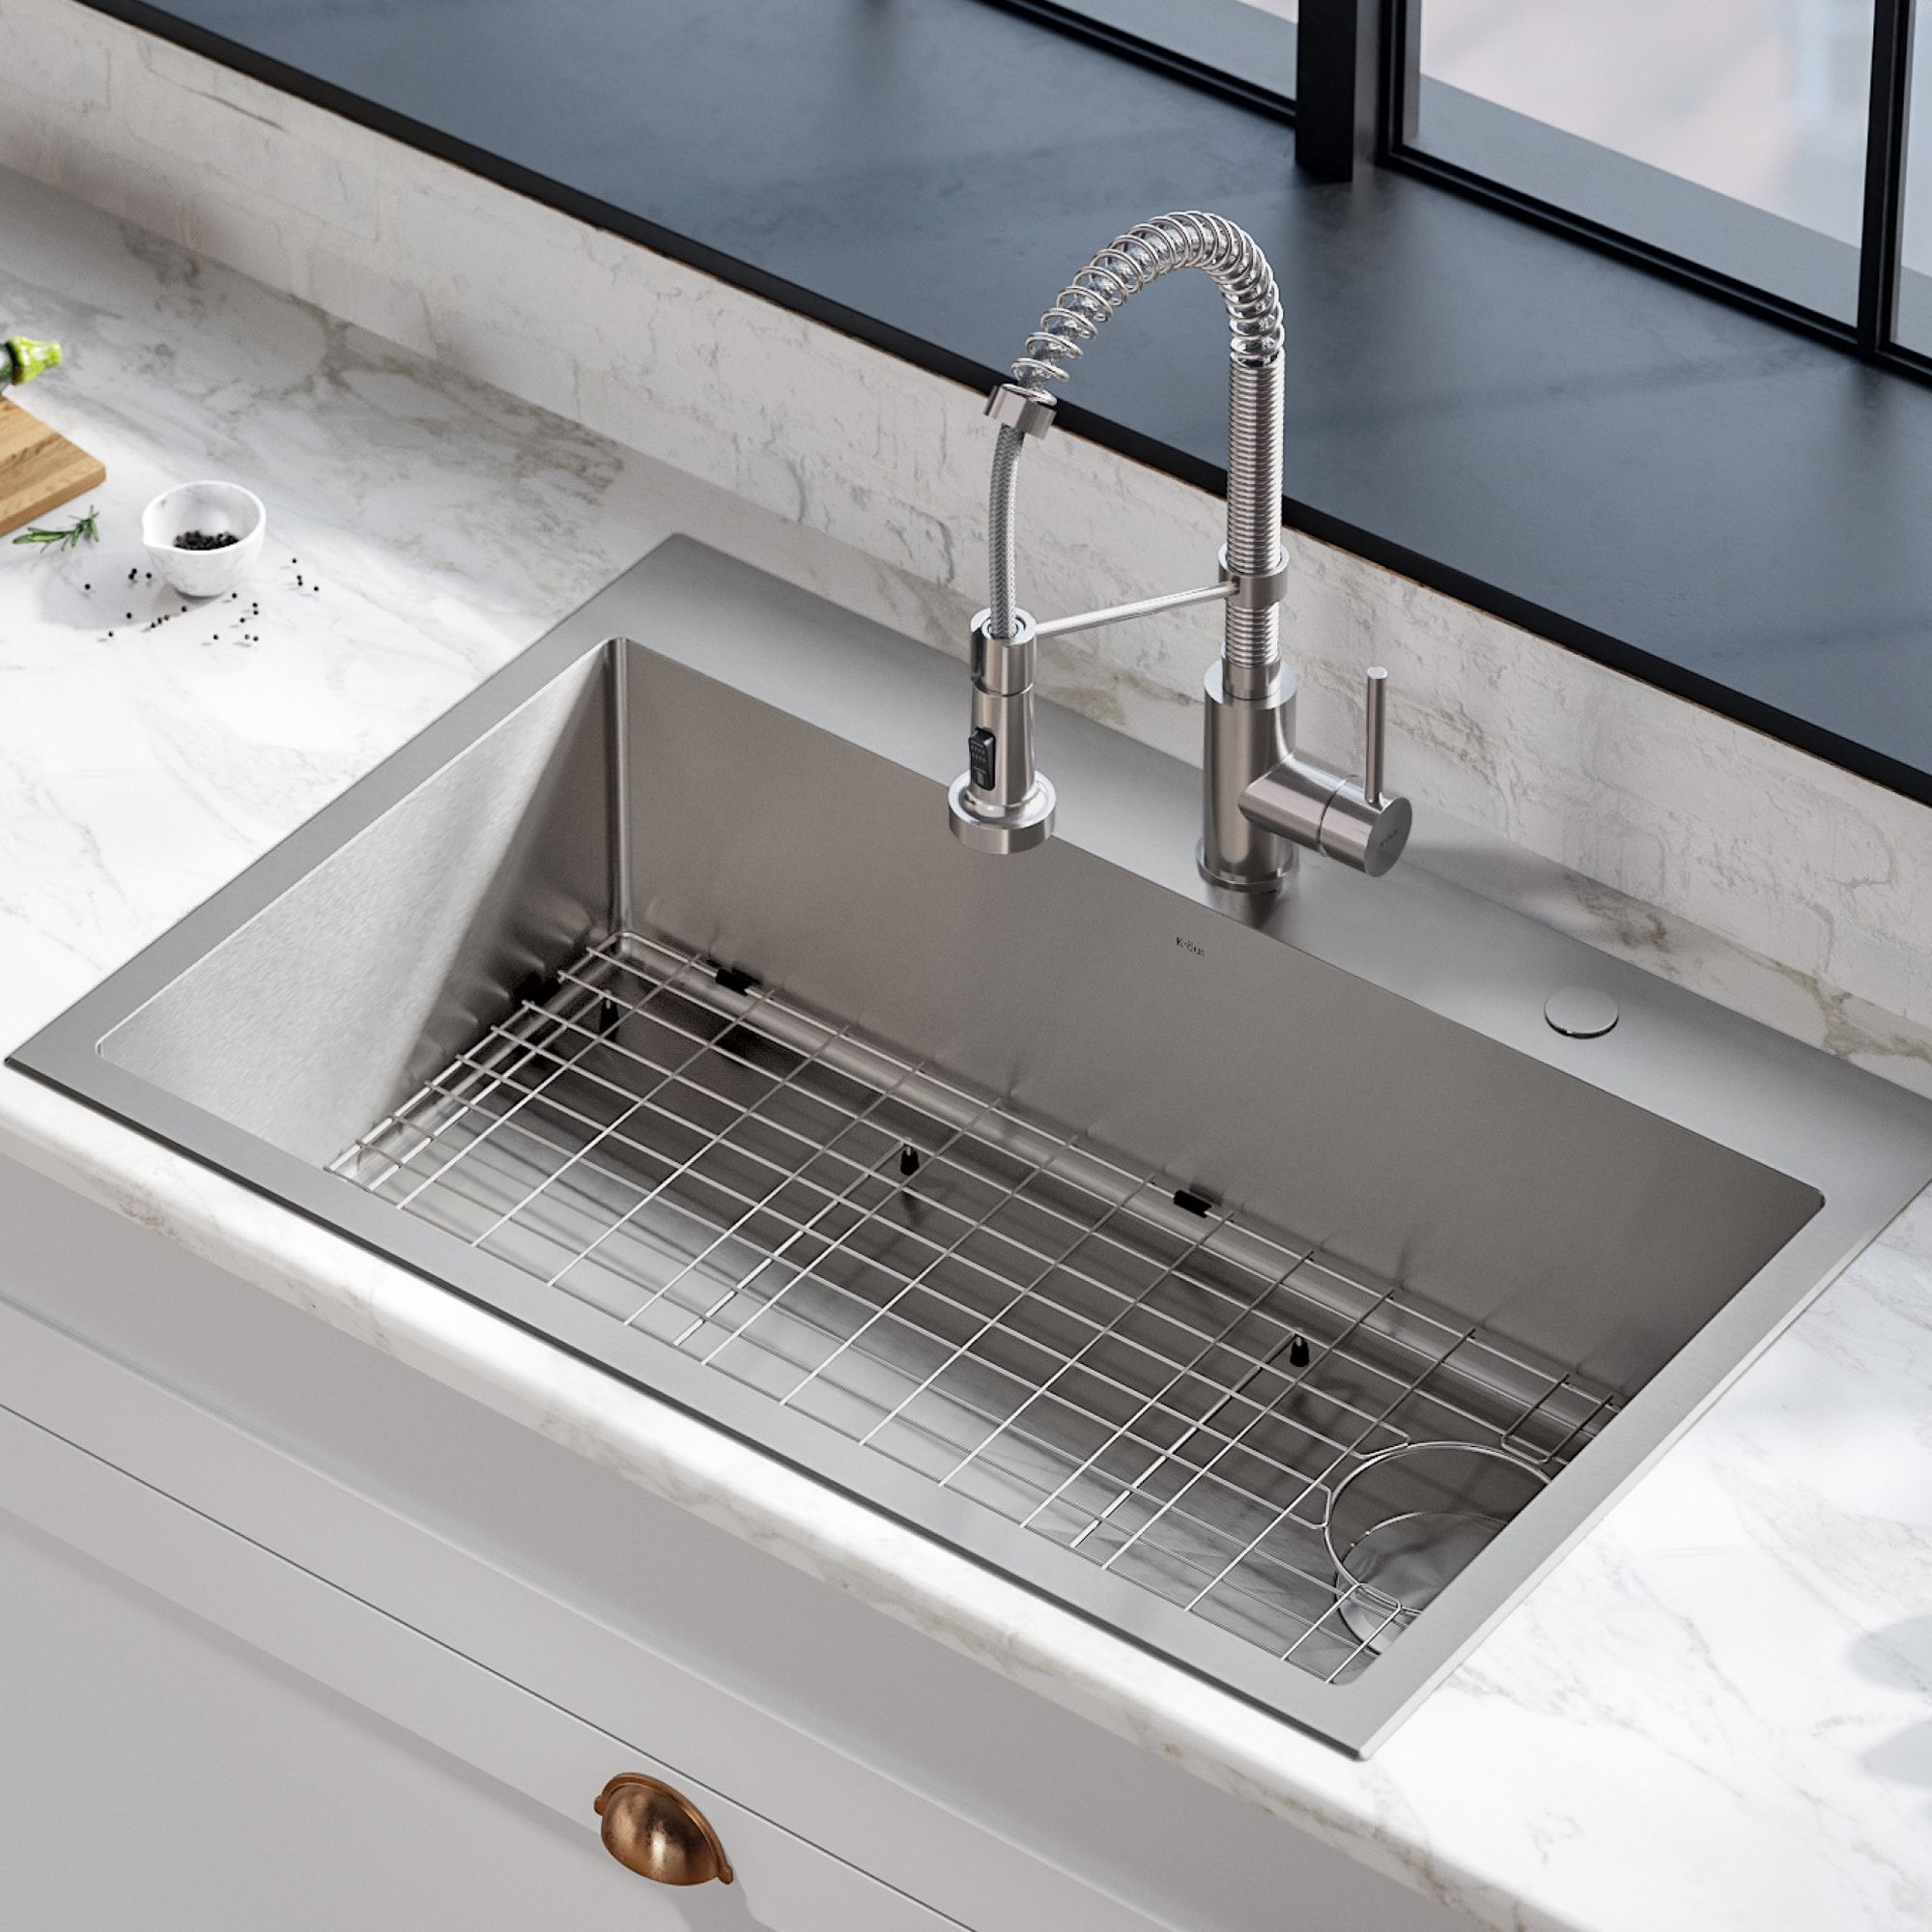 Points to remember when Buying a Stylish Stainless-Steel Kitchen Sink